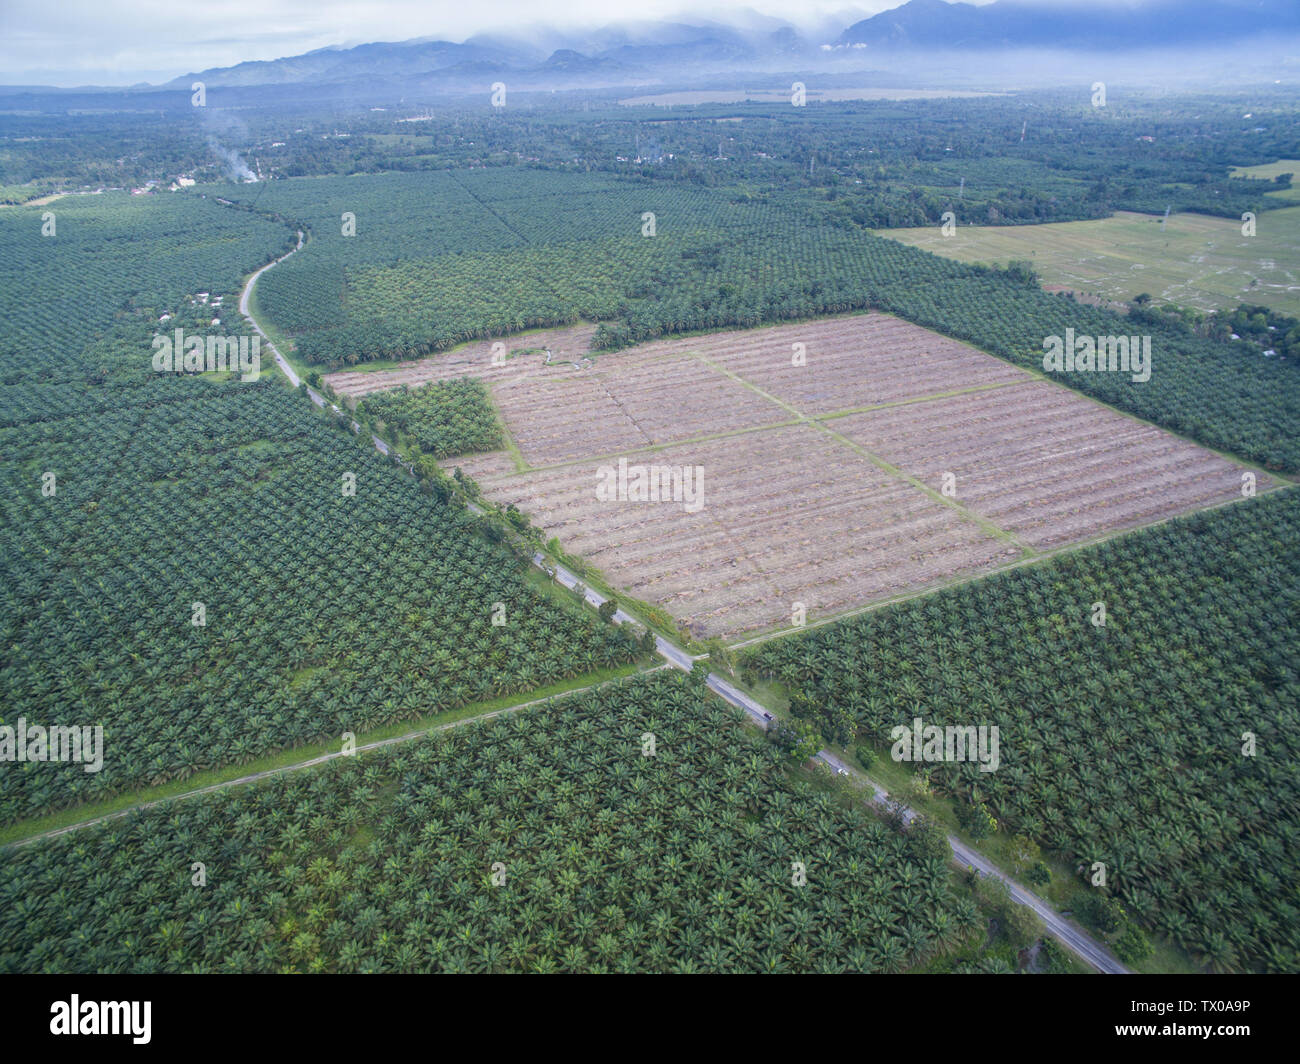 Replantation or Rejuvenation of palm oil tree or plantation in South Sulawesi, Indonesia. Stock Photo